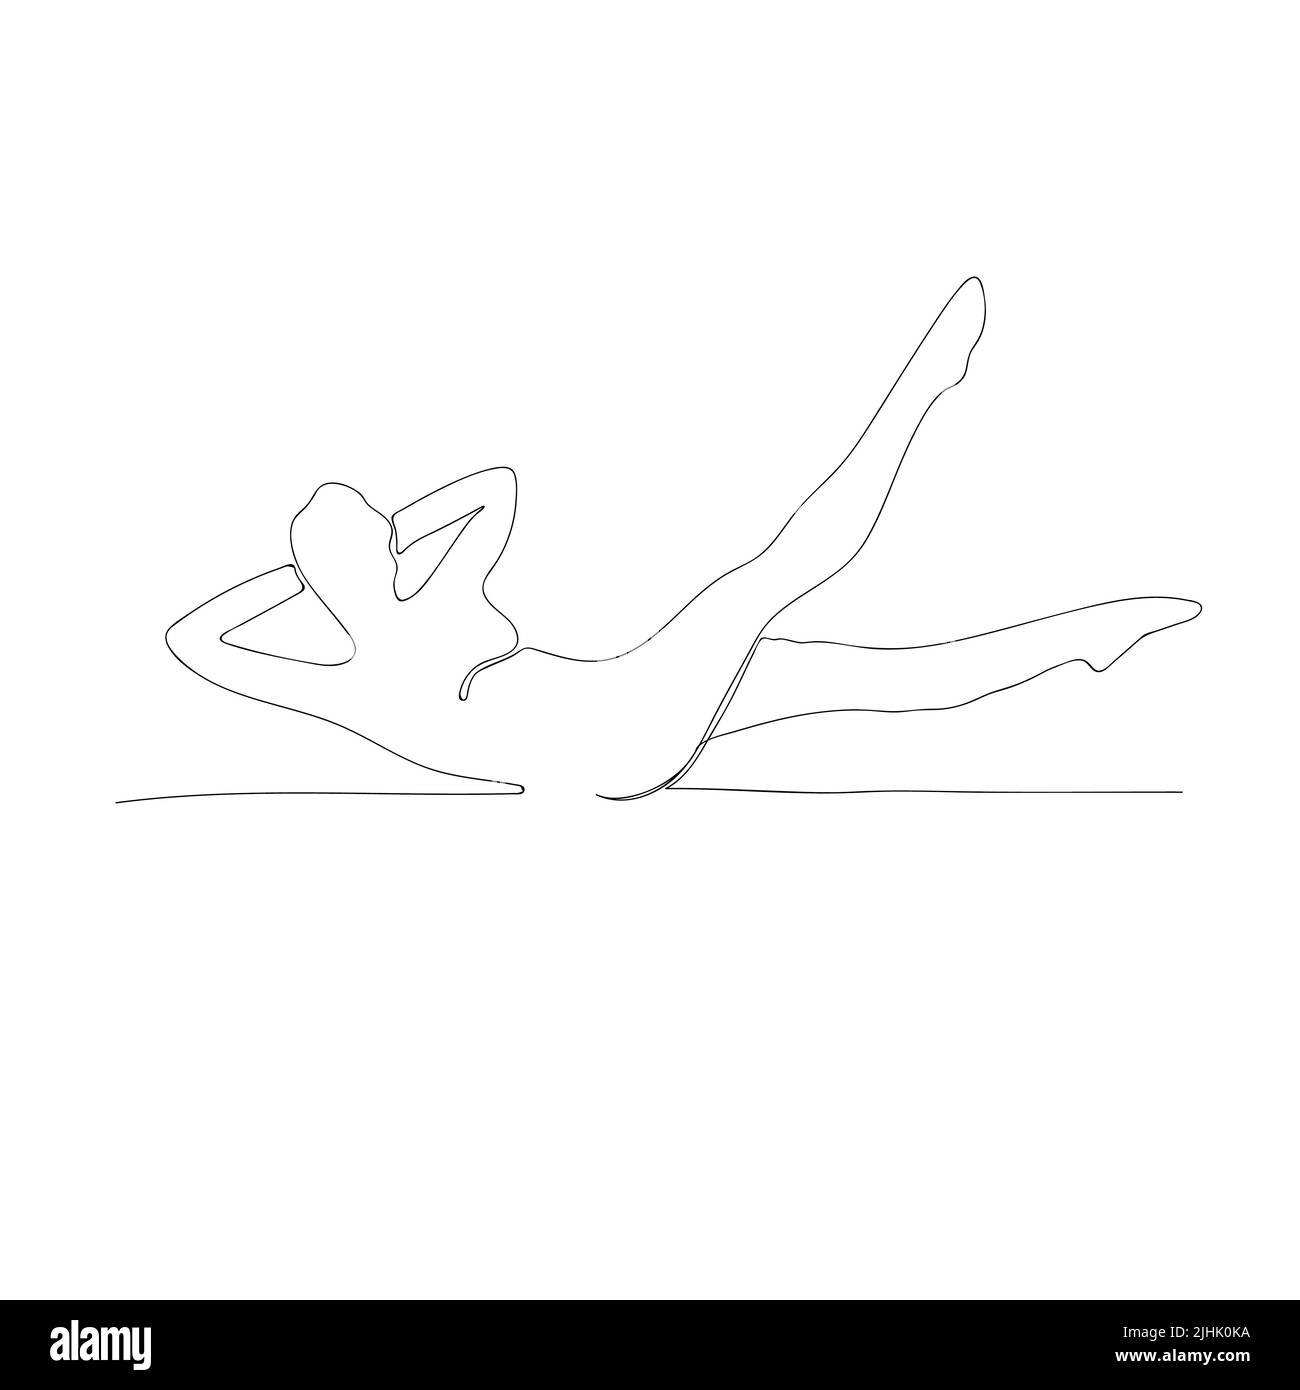 continuous line one drawing of beautiful women fitness yoga exercise health concept vector illustration. Stock Photo